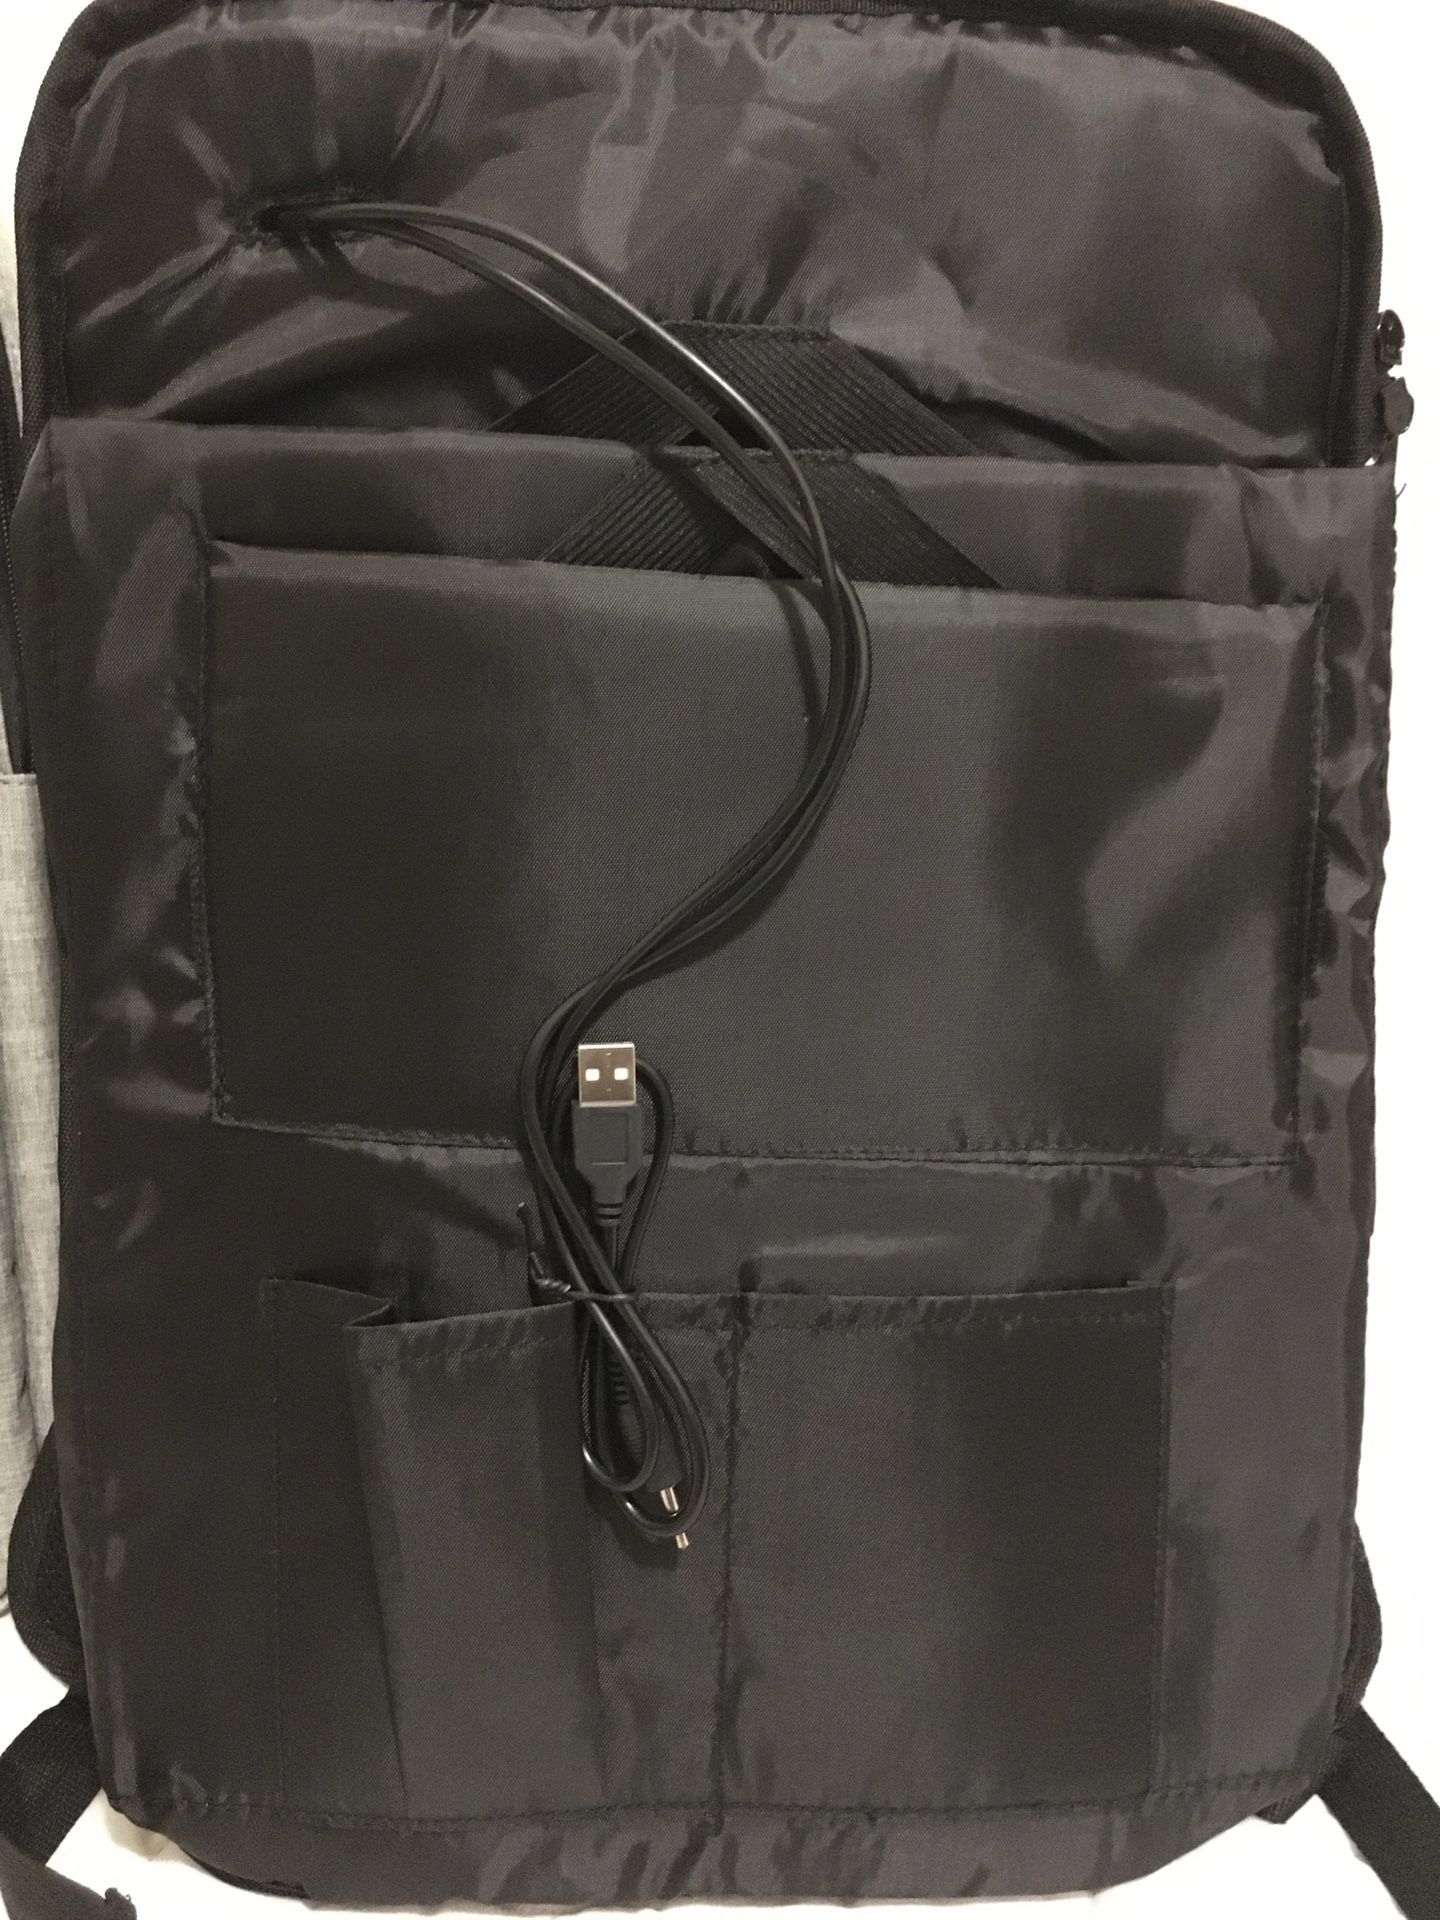 Brand New 17 Inch Convertible Laptop Bag Backpack